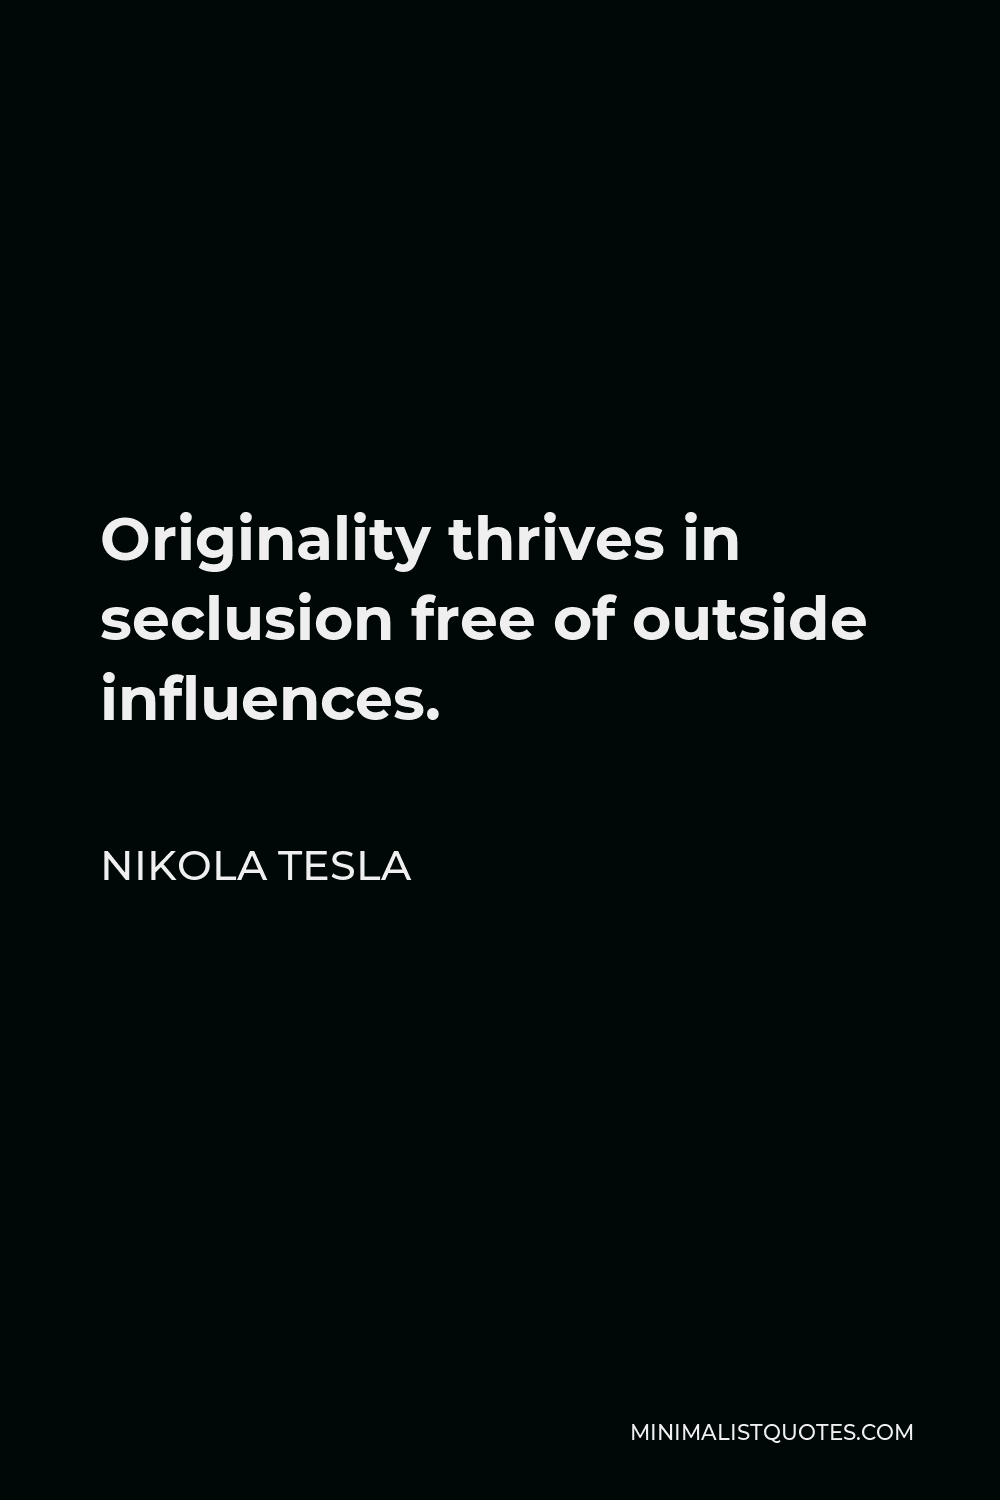 Nikola Tesla Quote - Originality thrives in seclusion free of outside influences.